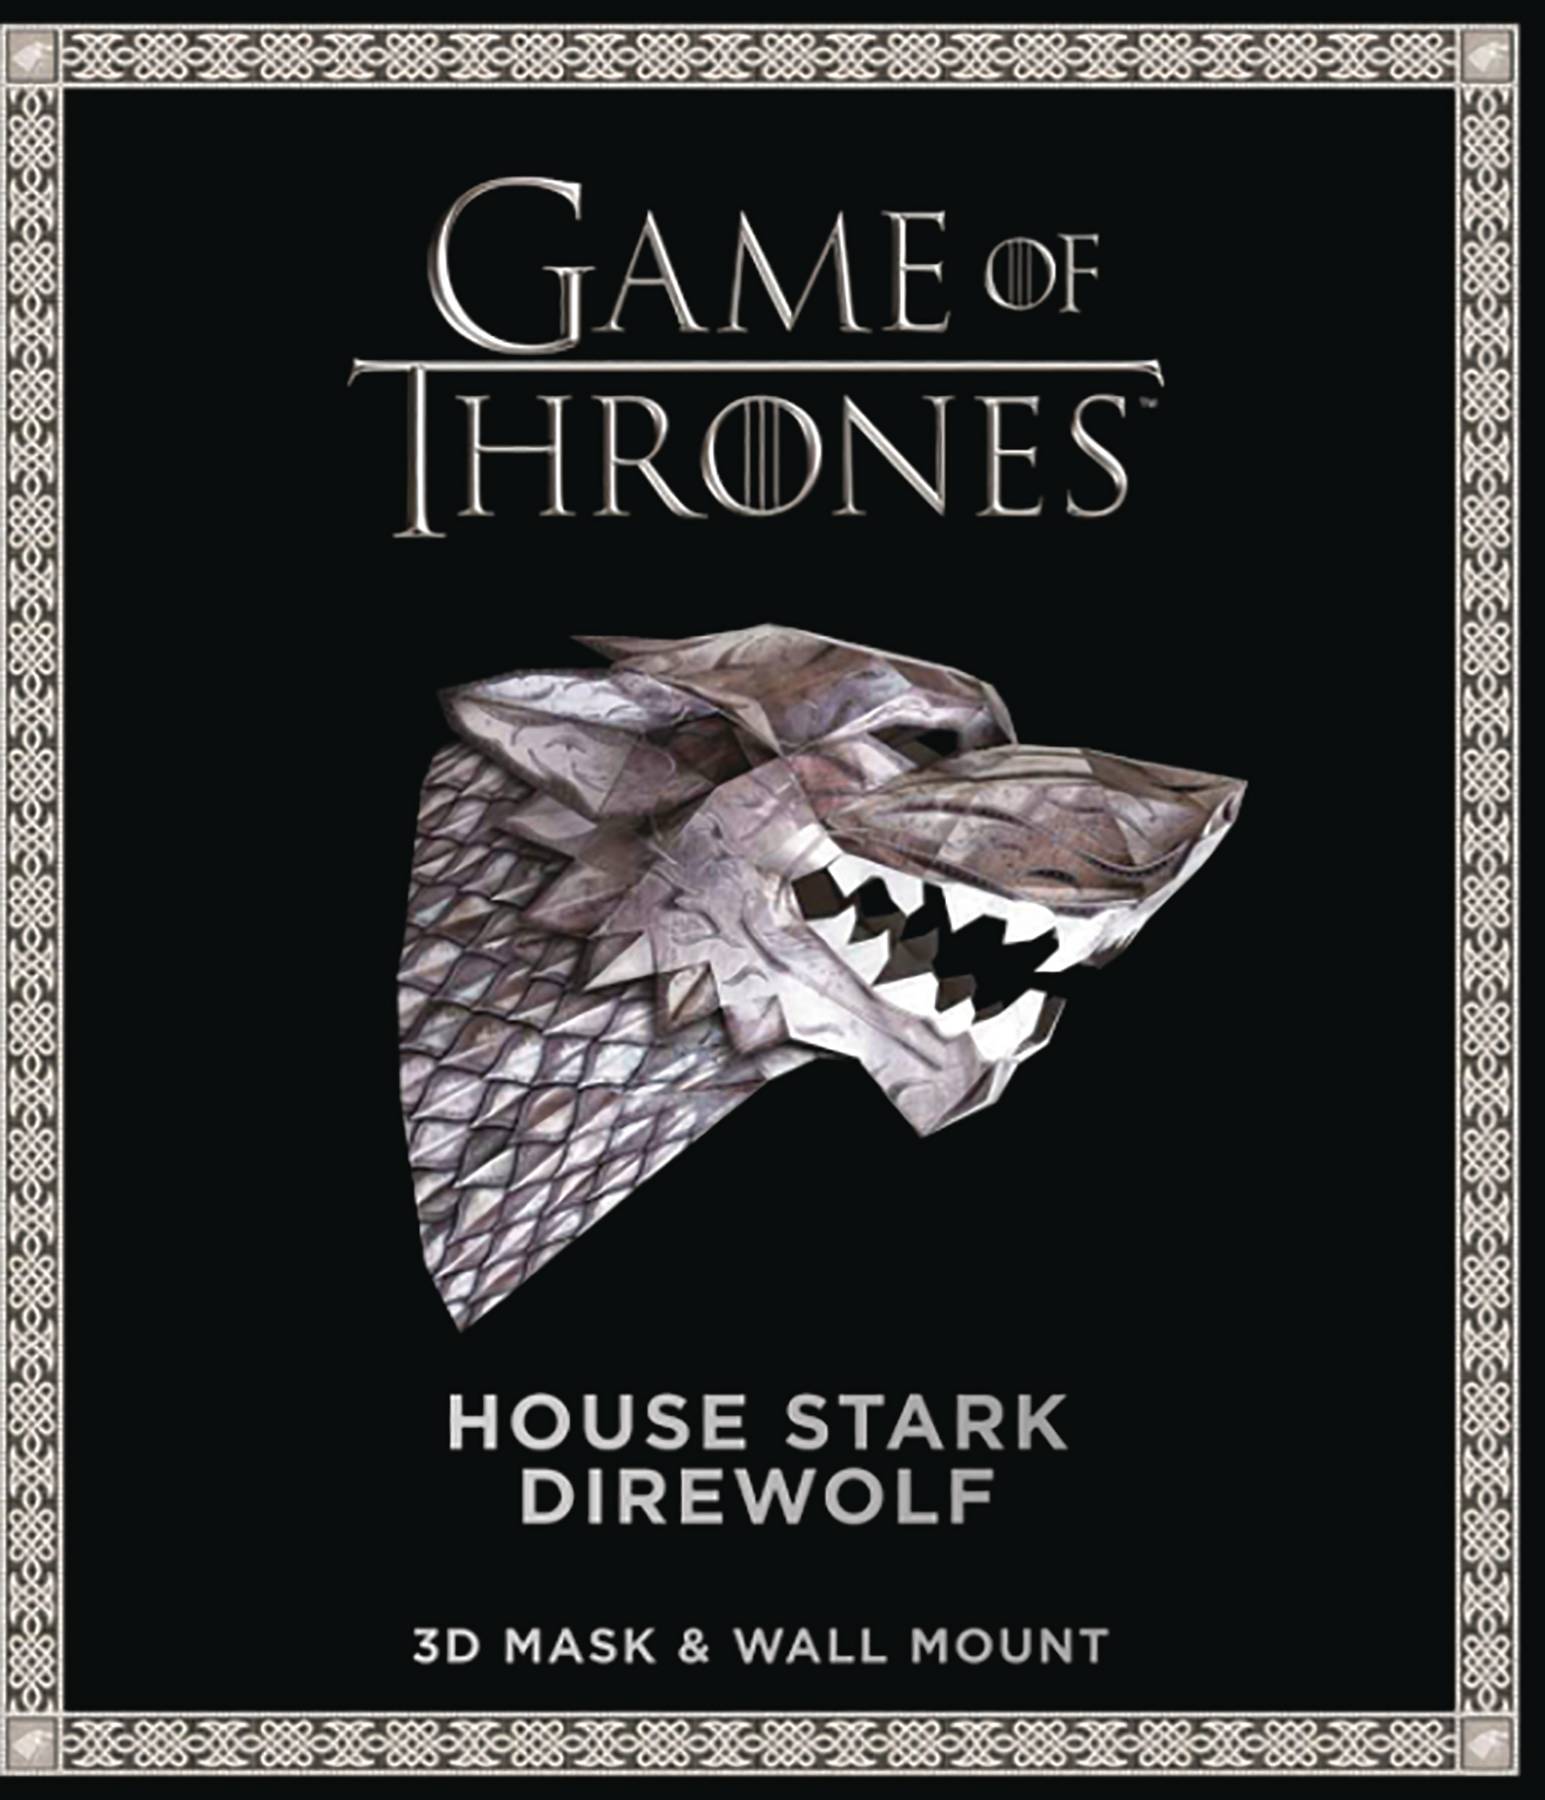 Game of Thrones Mask With Book #1 House Stark Direwolf